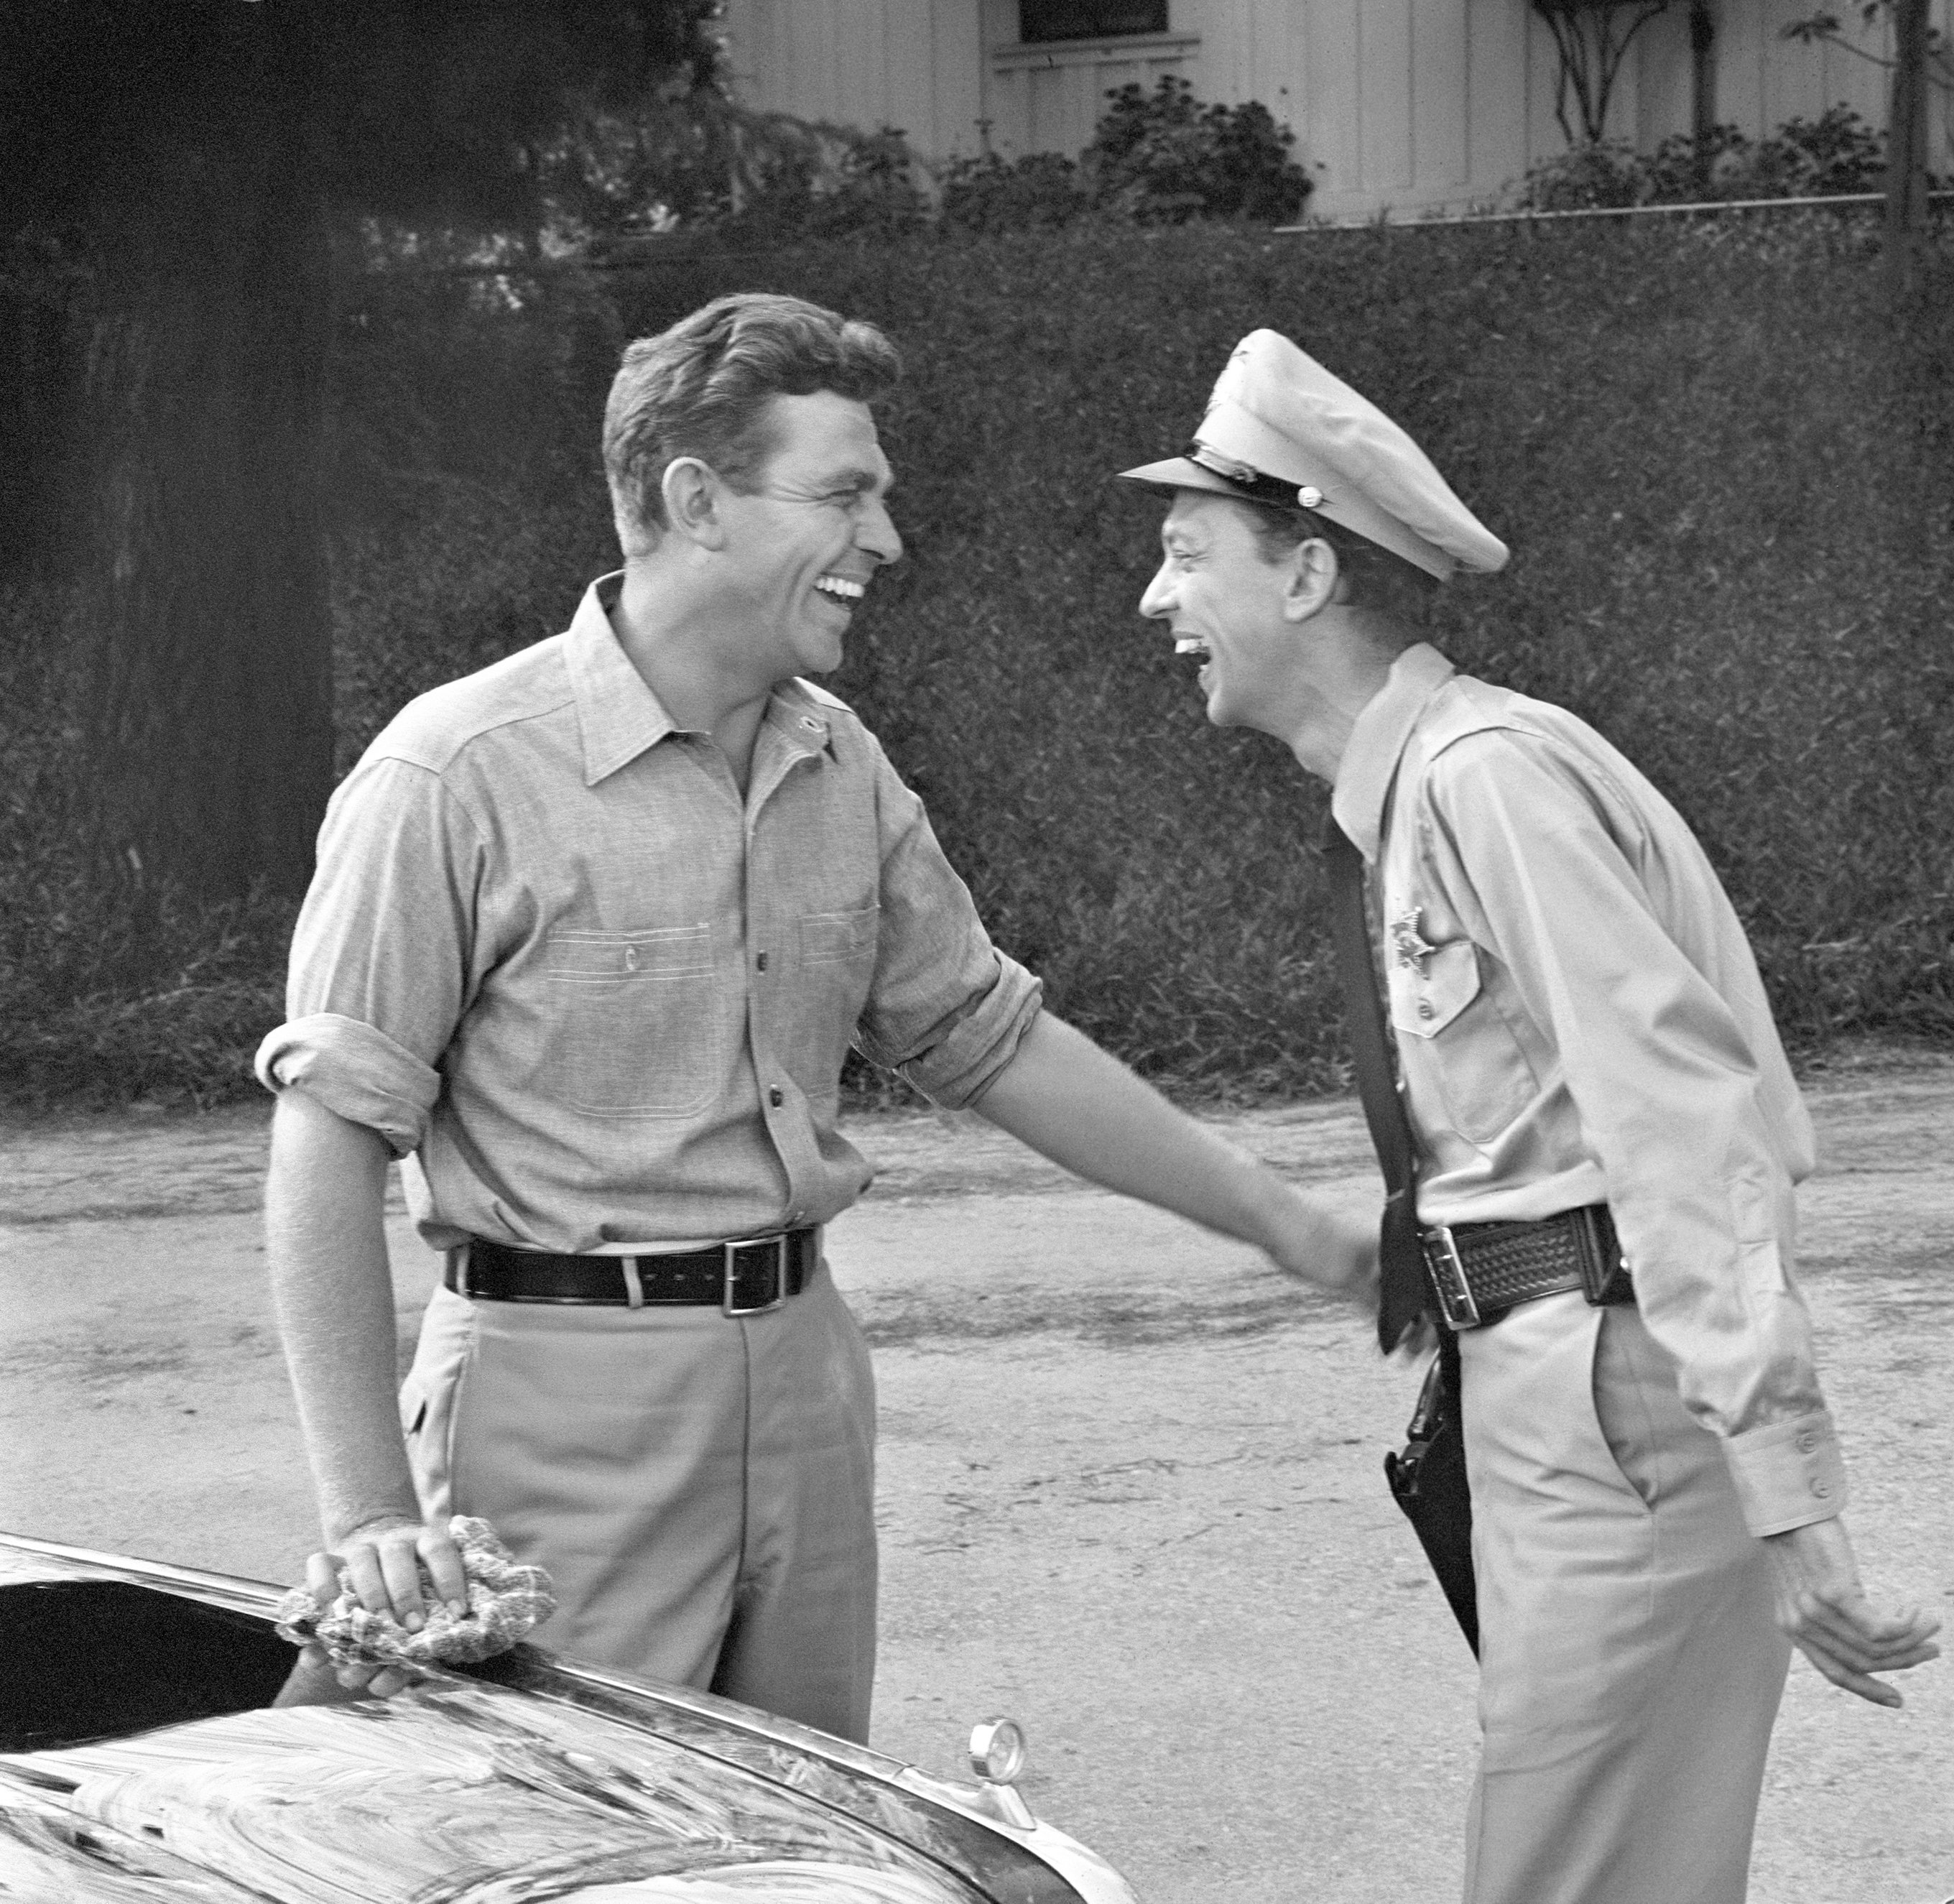 Andy Griffith, left, and Don Knotts in Season 1, Episode 1 of 'The Andy Griffith Show' in 1960